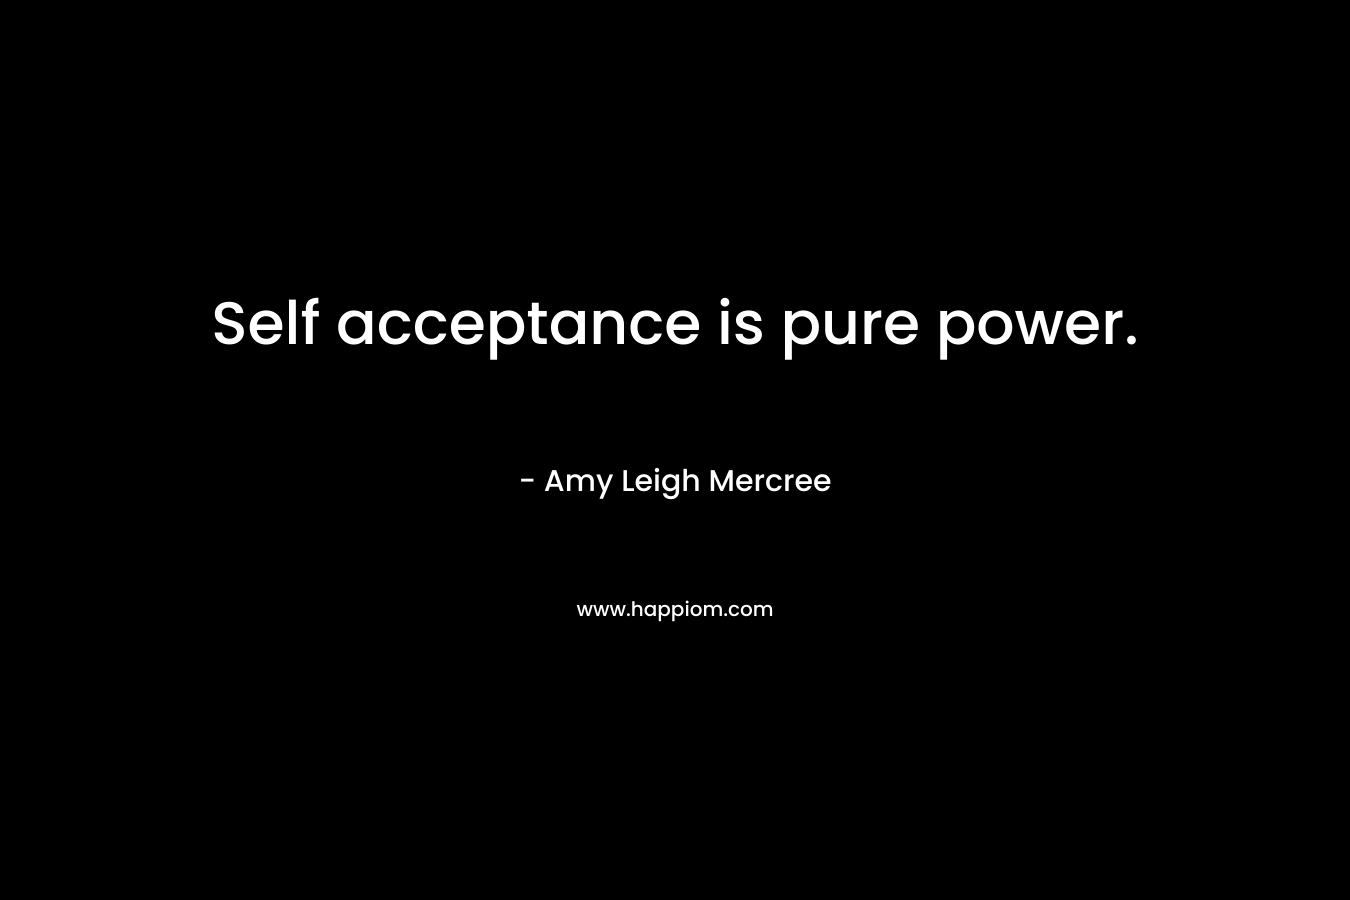 Self acceptance is pure power. – Amy Leigh Mercree